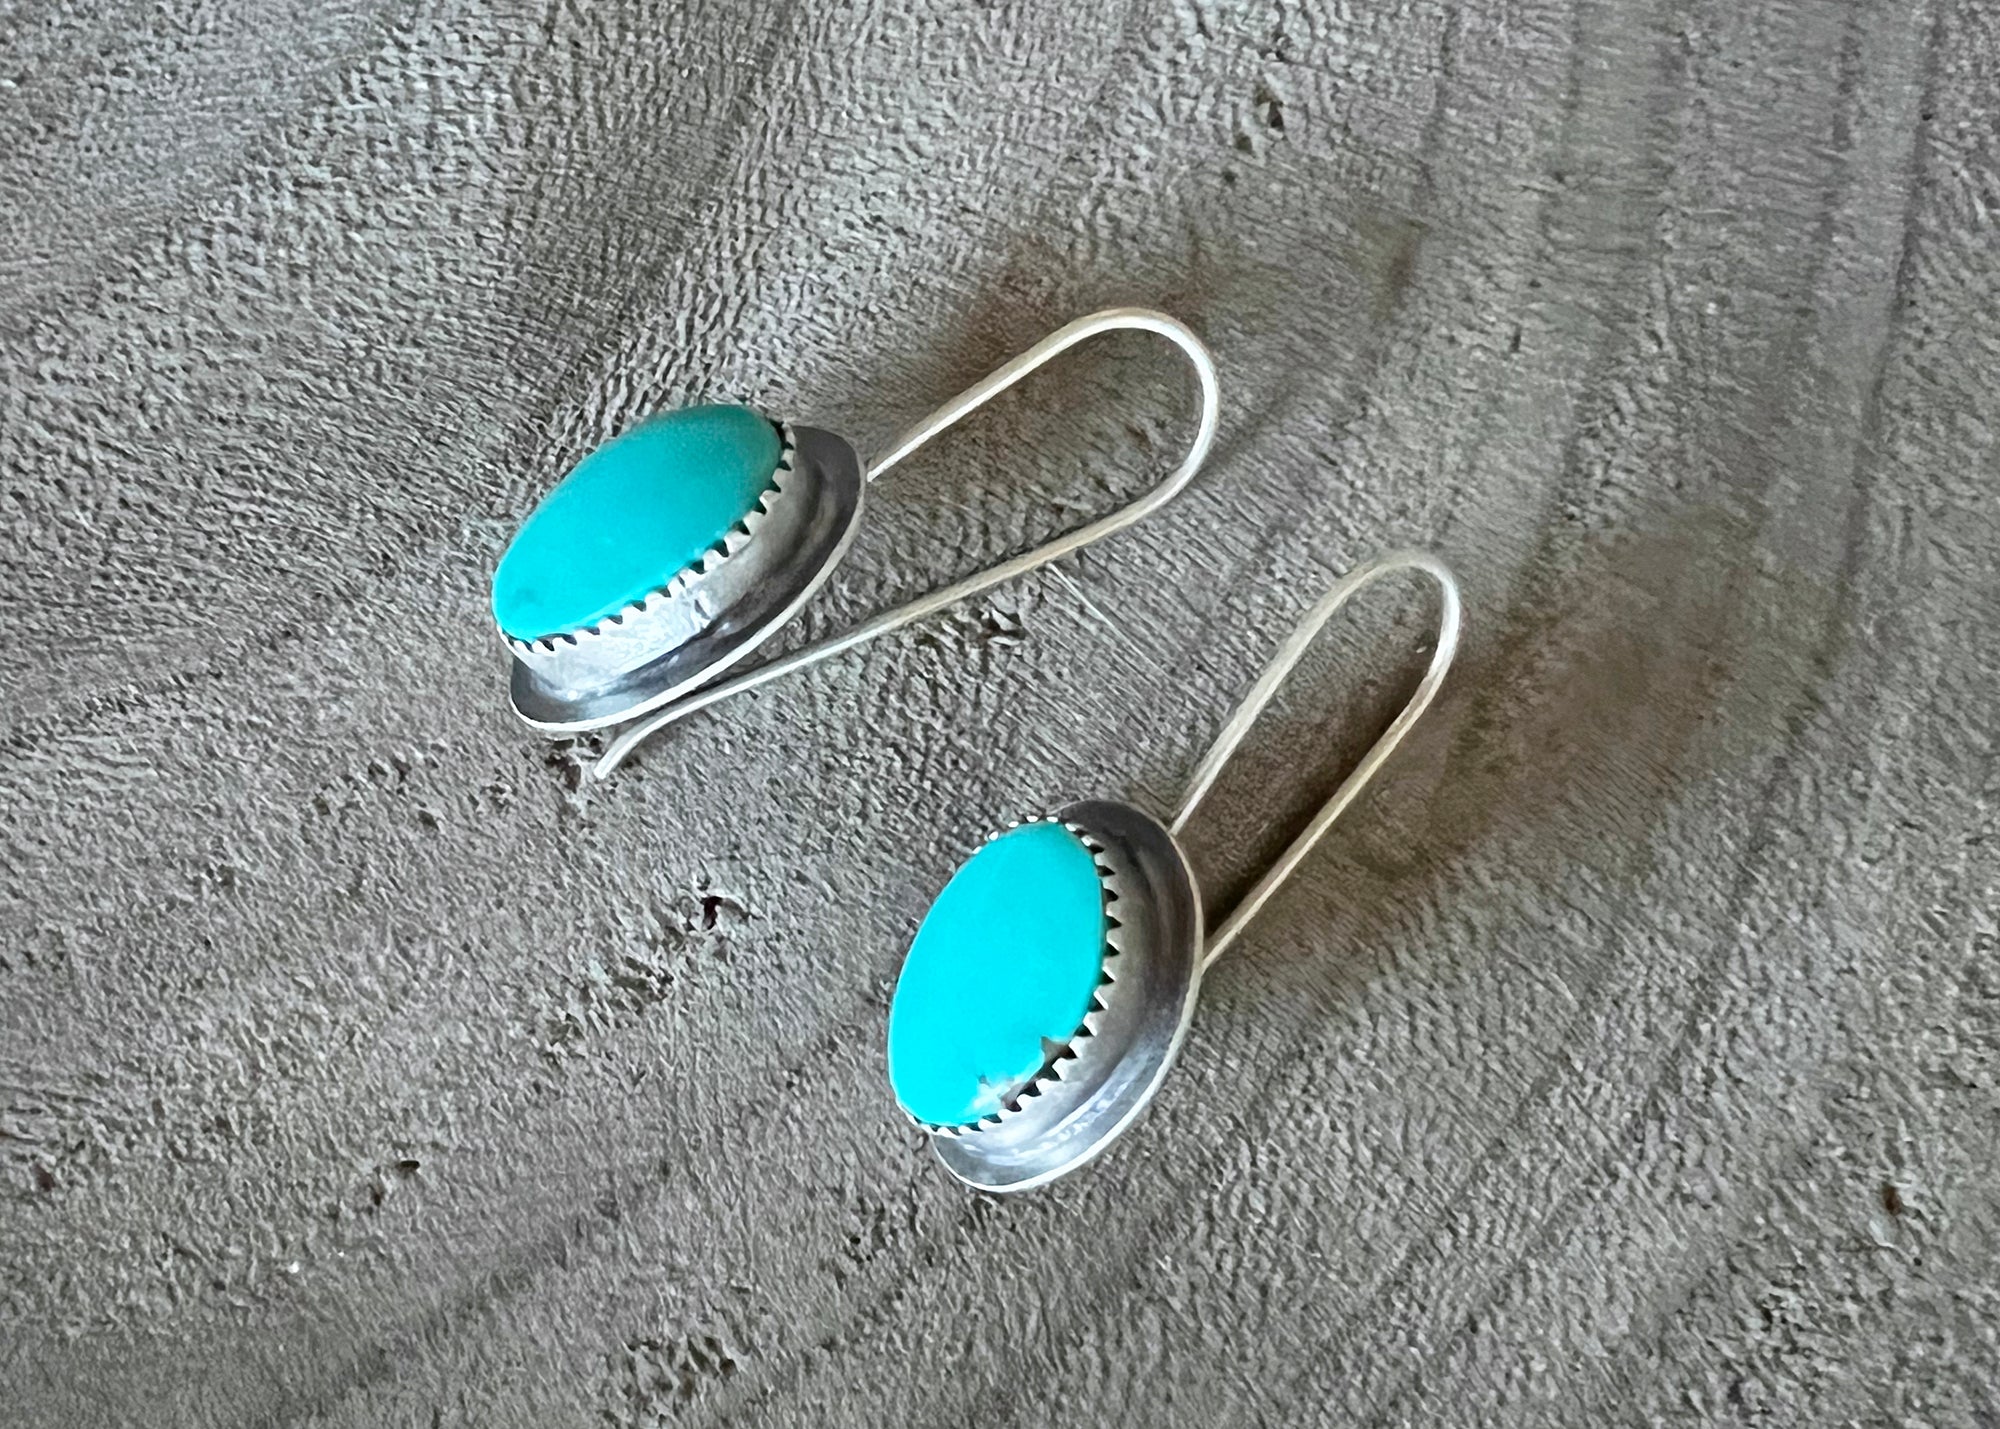 Tibetan Hand-Carved Silver and Turquoise Earrings - DharmaShop